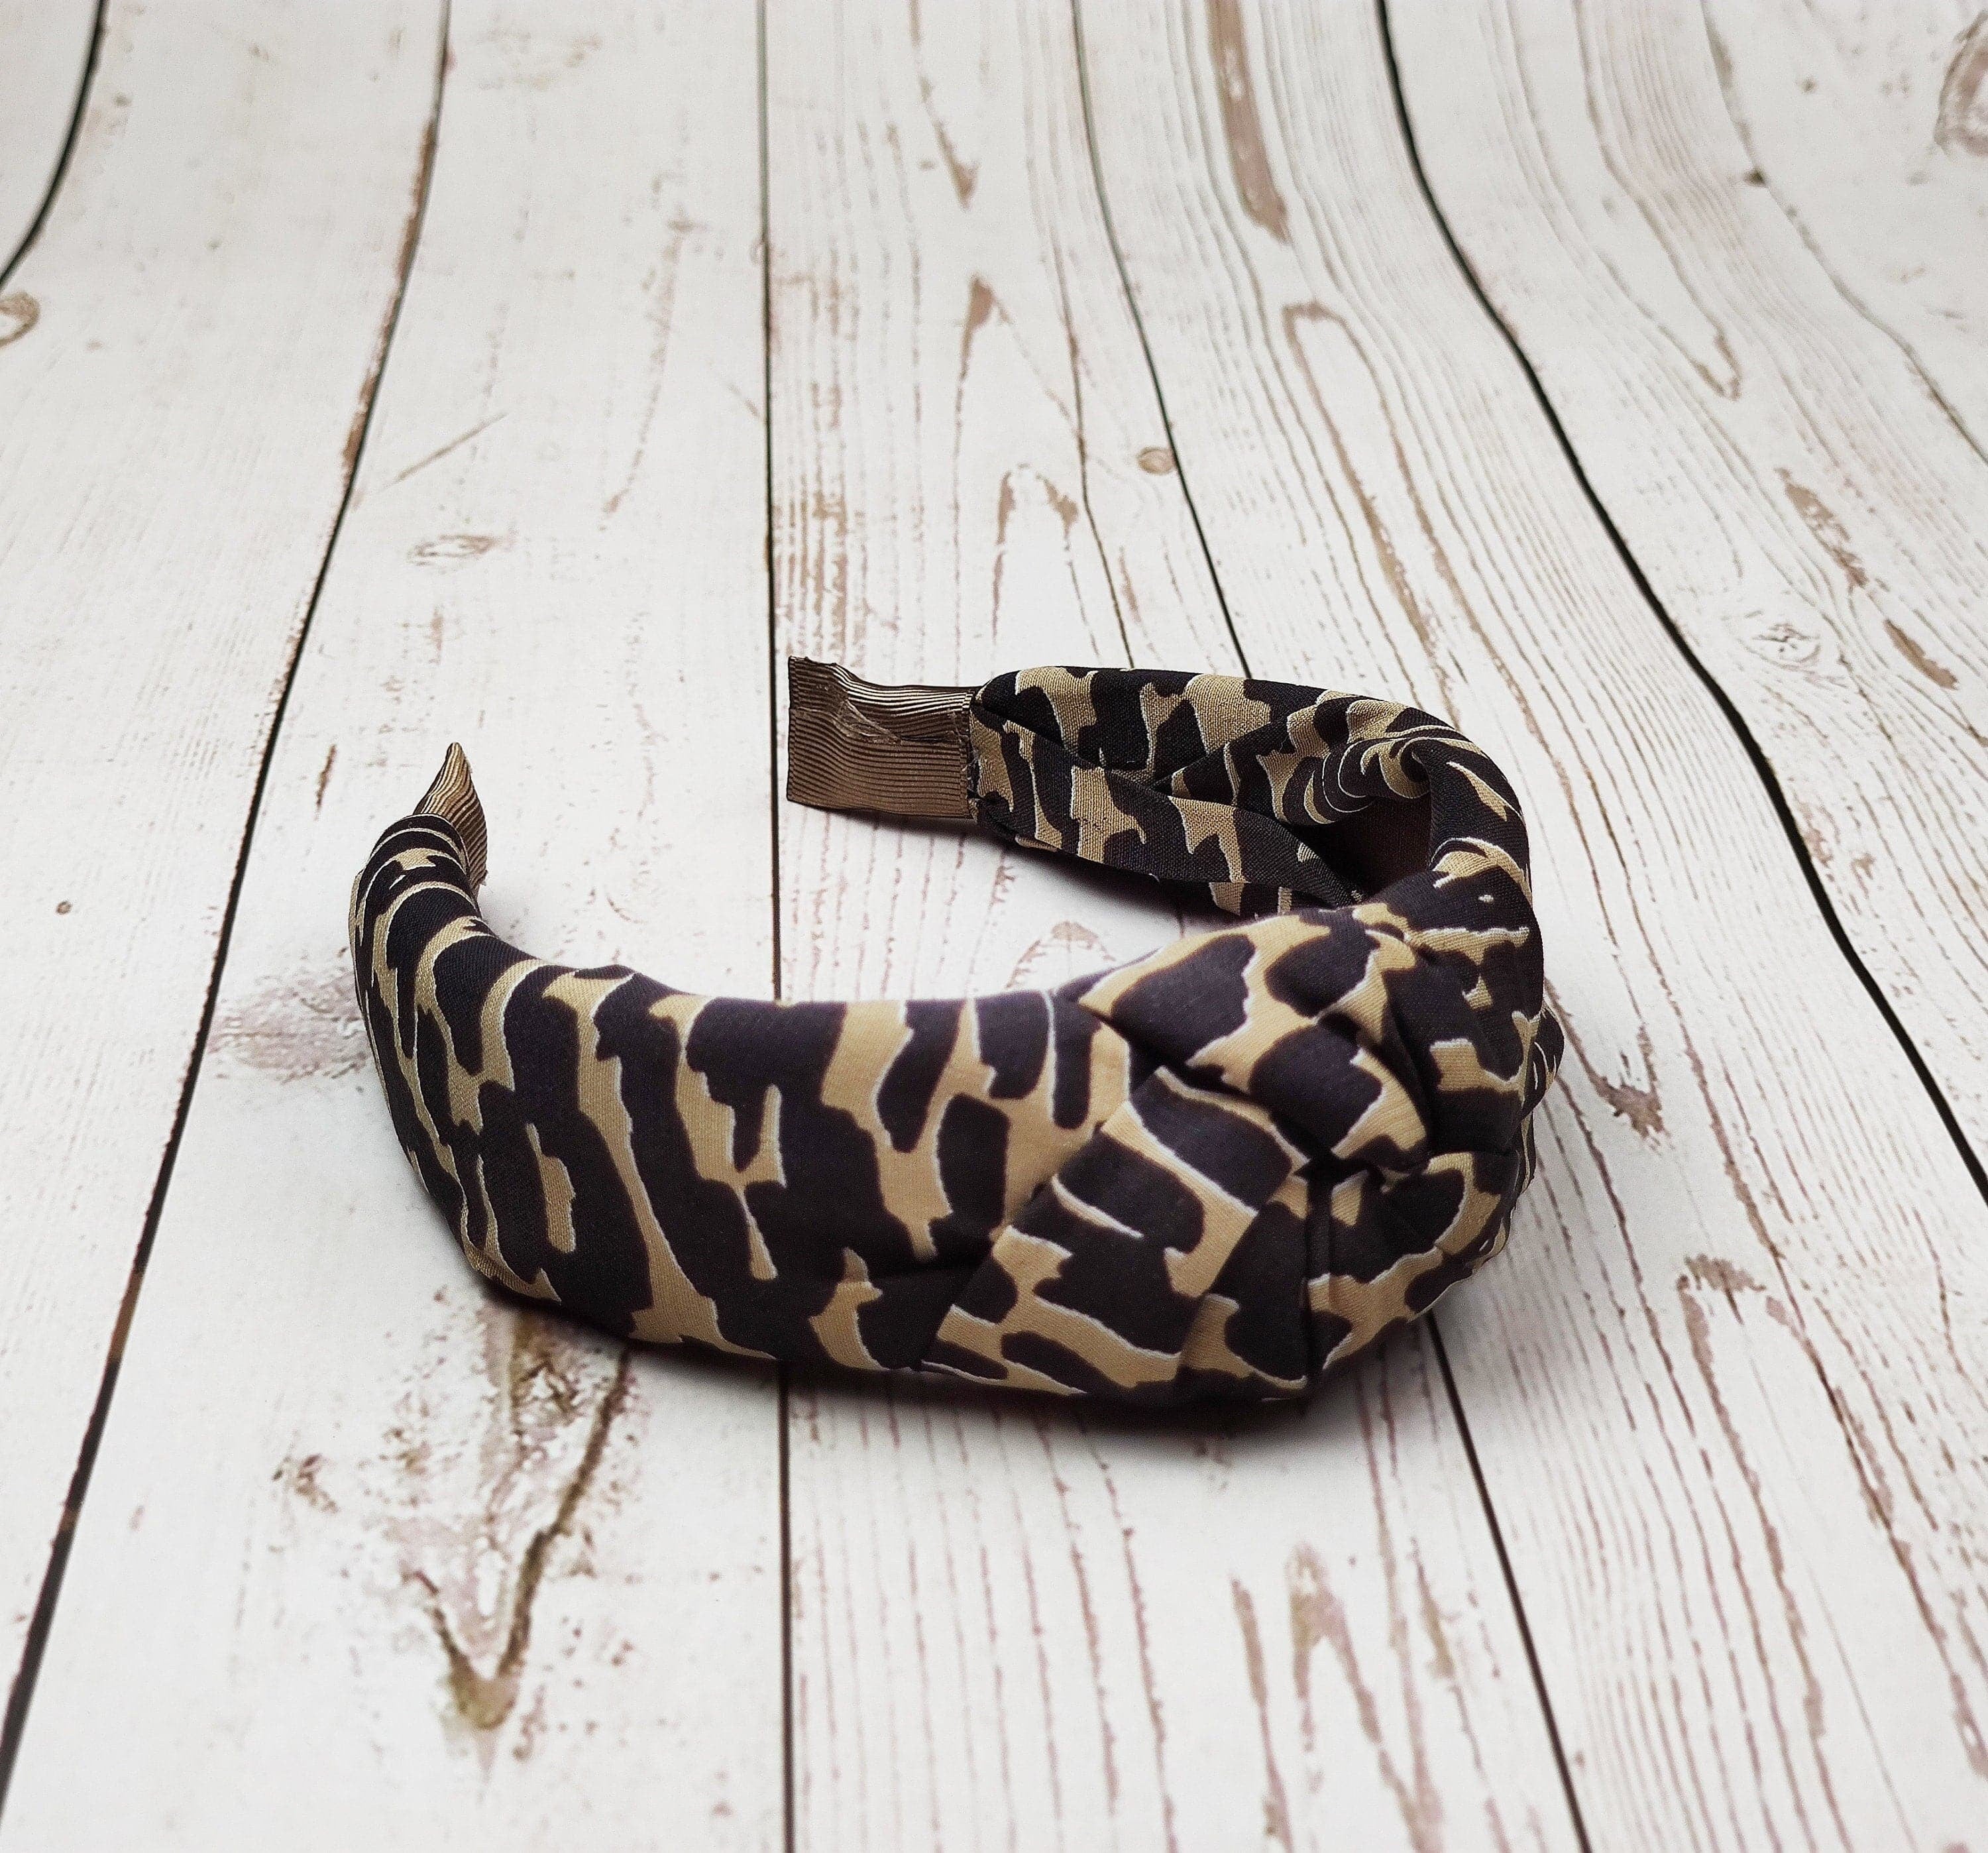 Elevate your hair game with this padded leopard pattern headband, a versatile and trendy accessory for any hair type.